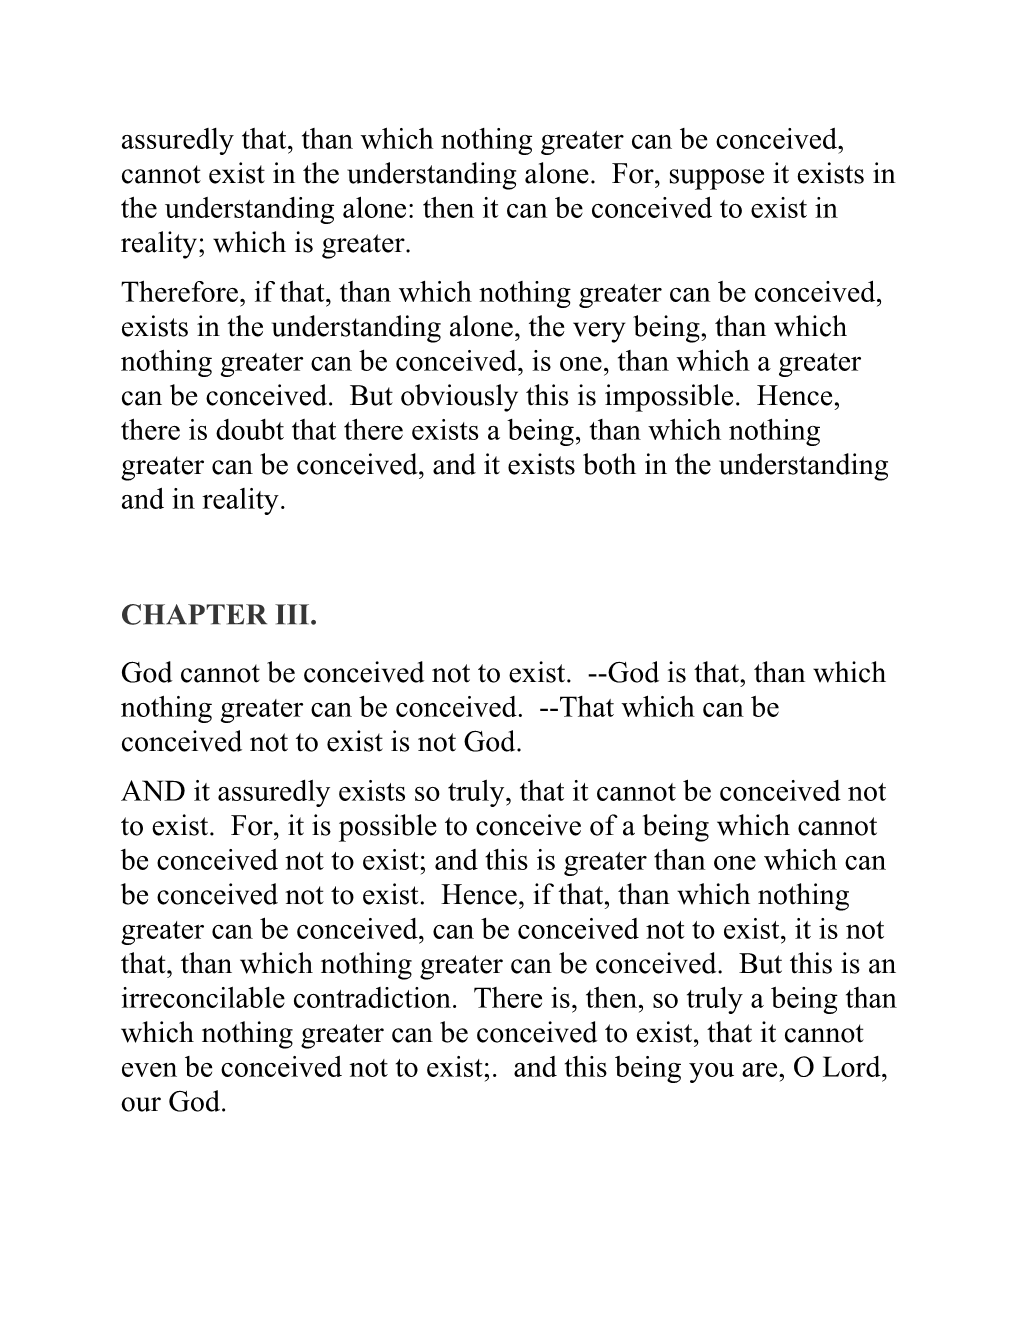 St. Anselm (1033-1109): the Ontological Argument for God S Existence from Proslogium